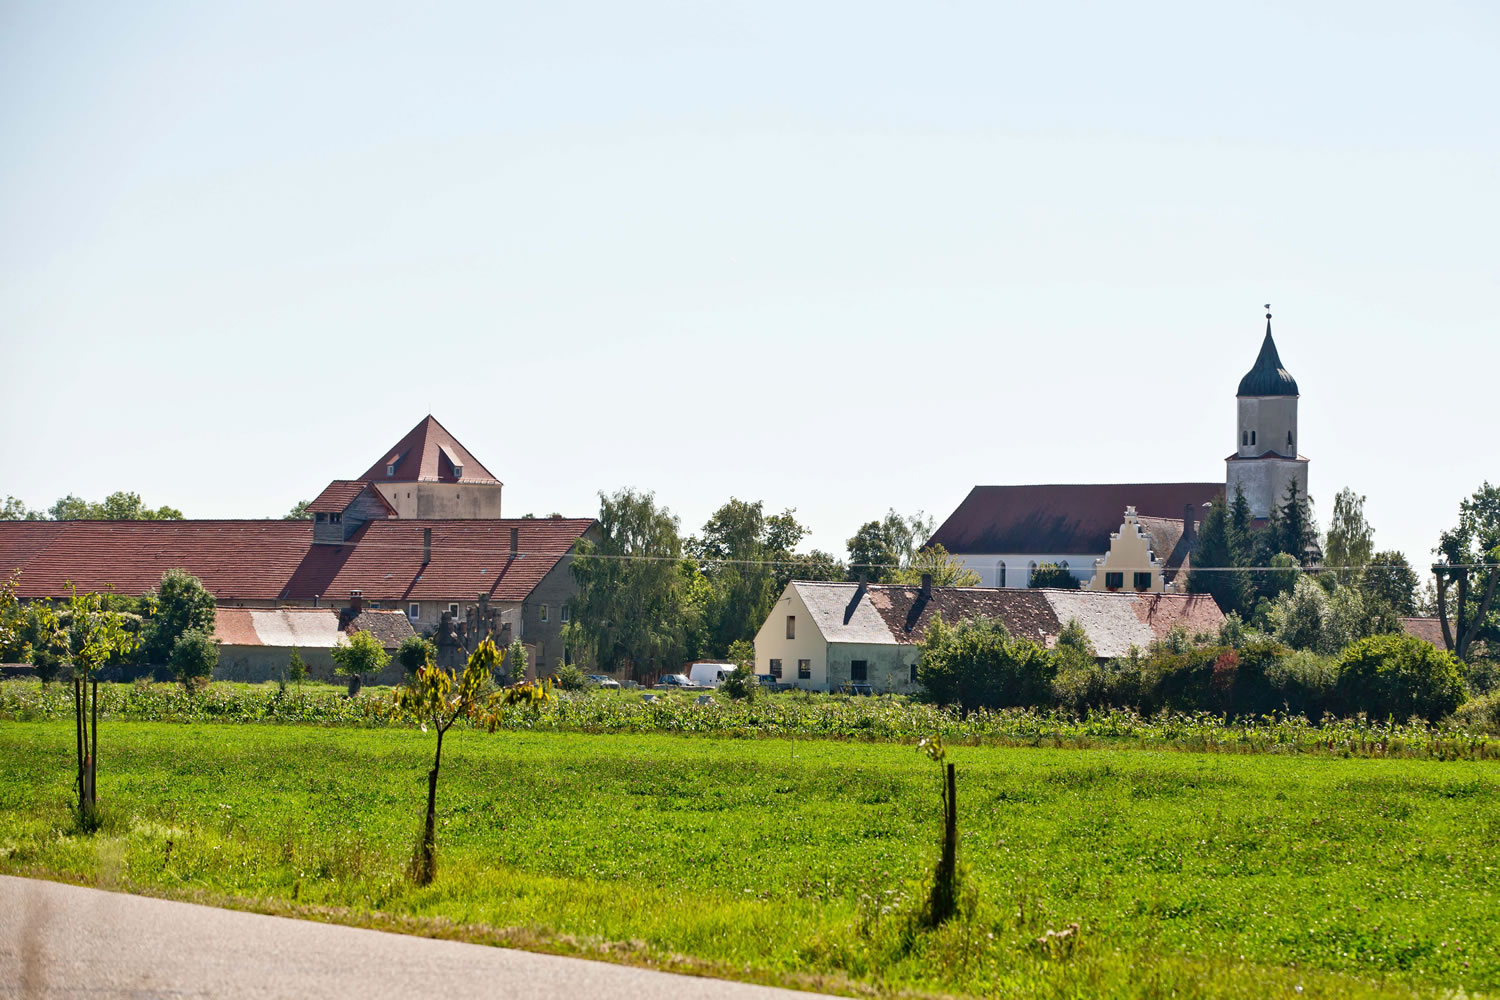 The village of Klosterzimmern near Deiningen, Germany, is one of the homes of the &quot;Twelve Tribes&quot; sect.